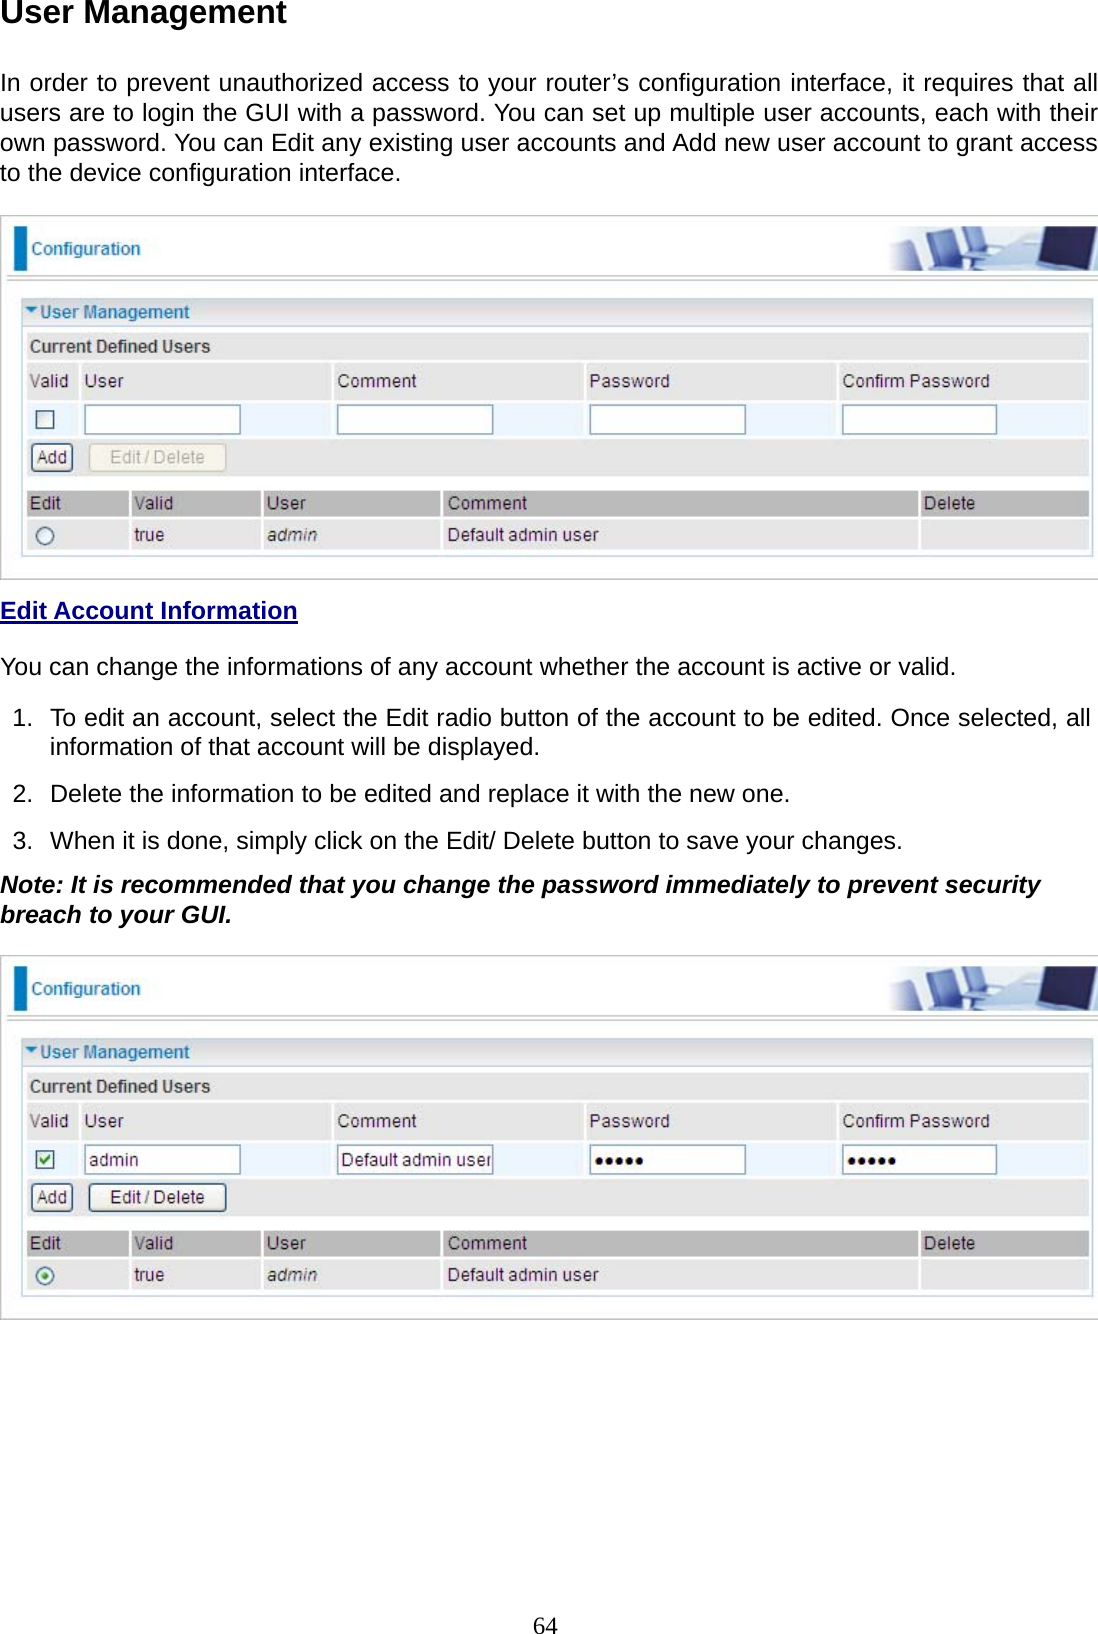 64 User Management   In order to prevent unauthorized access to your router’s configuration interface, it requires that all users are to login the GUI with a password. You can set up multiple user accounts, each with their own password. You can Edit any existing user accounts and Add new user account to grant access to the device configuration interface.    Edit Account Information  You can change the informations of any account whether the account is active or valid.  1.  To edit an account, select the Edit radio button of the account to be edited. Once selected, all information of that account will be displayed.  2.  Delete the information to be edited and replace it with the new one.  3.  When it is done, simply click on the Edit/ Delete button to save your changes.  Note: It is recommended that you change the password immediately to prevent security breach to your GUI.   